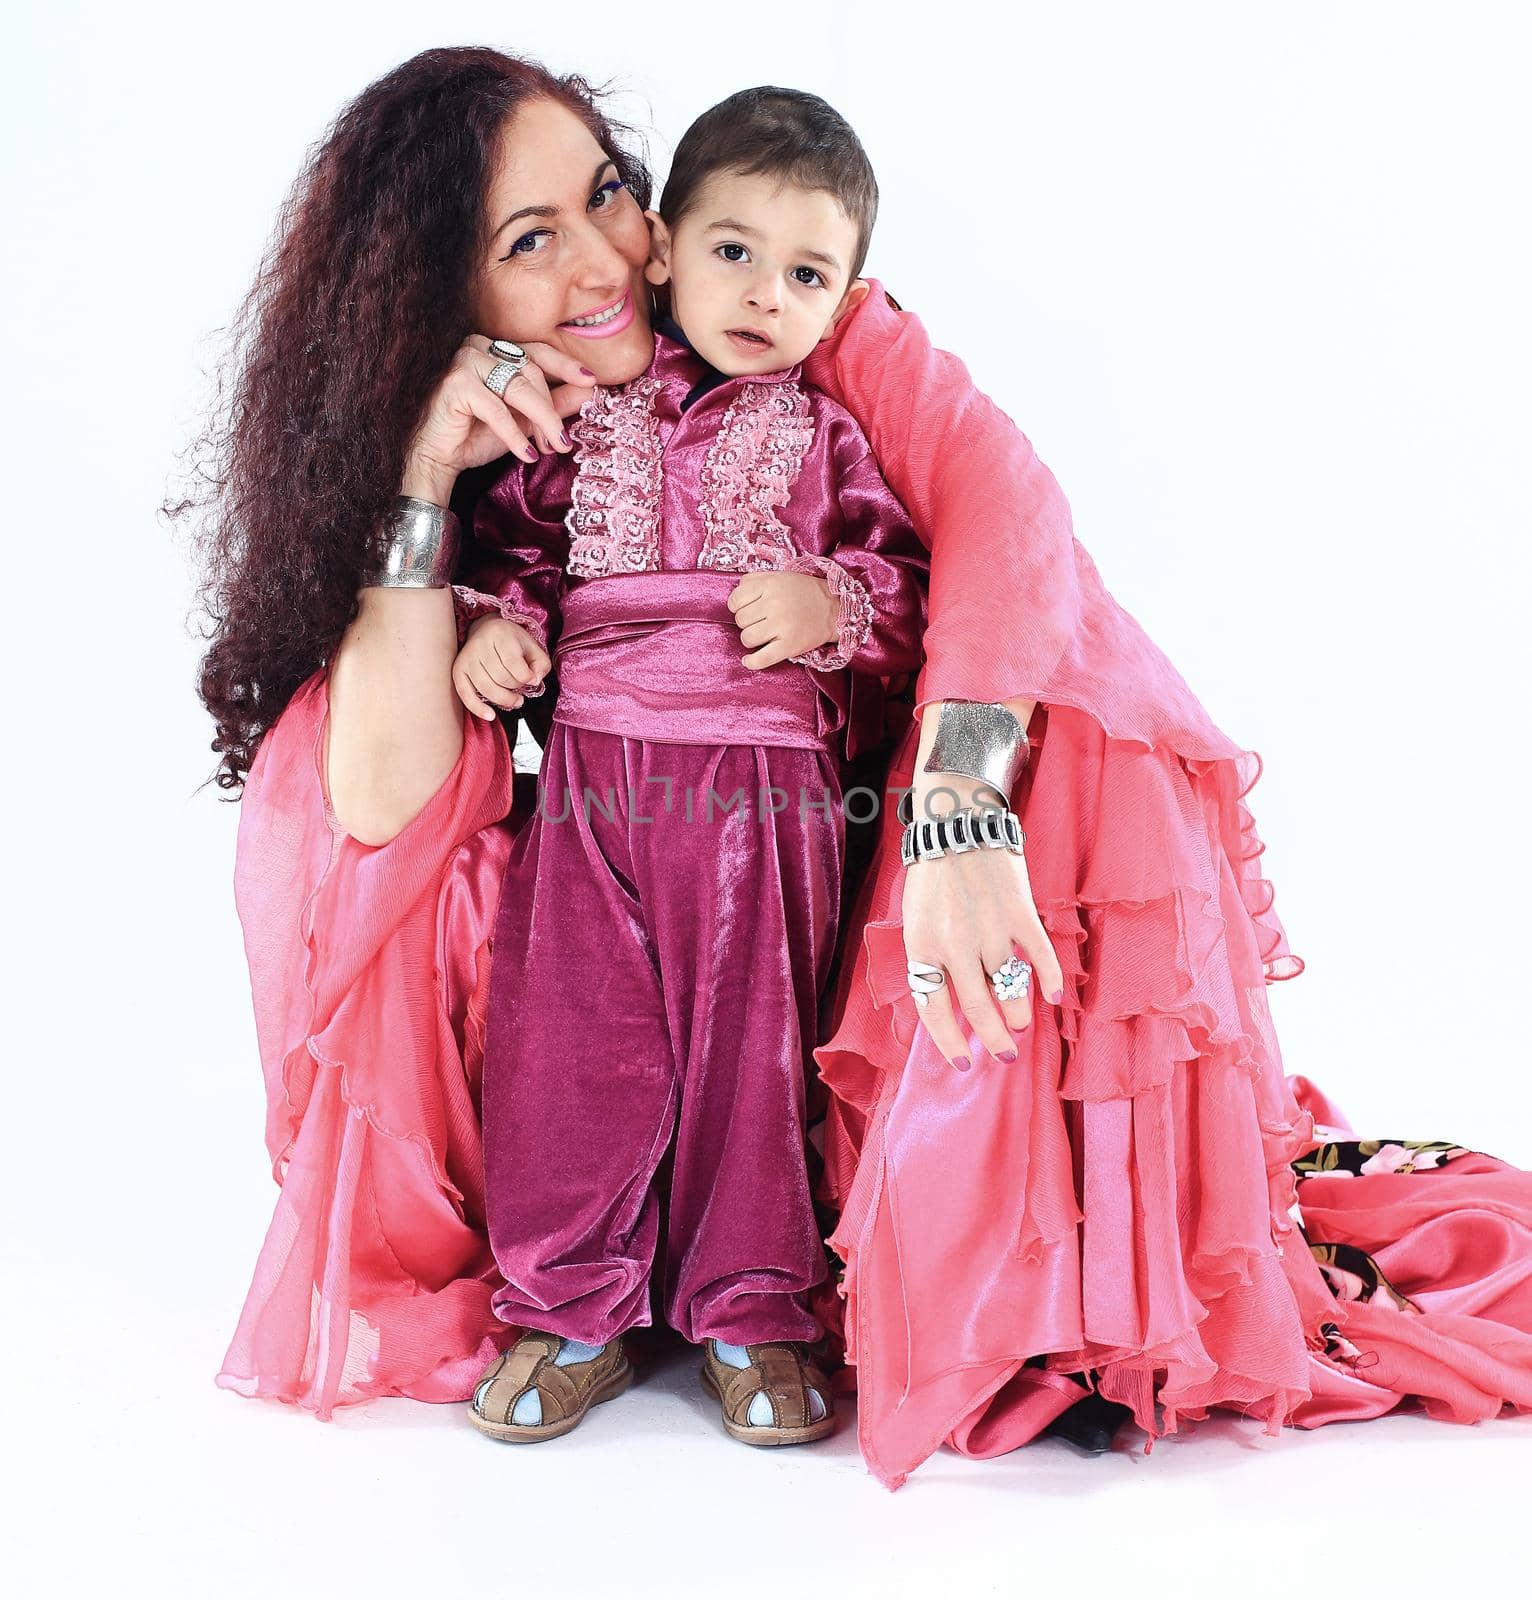 Gypsy family.mother and son.the national costume.ethnic culture.the photo with blank space for text